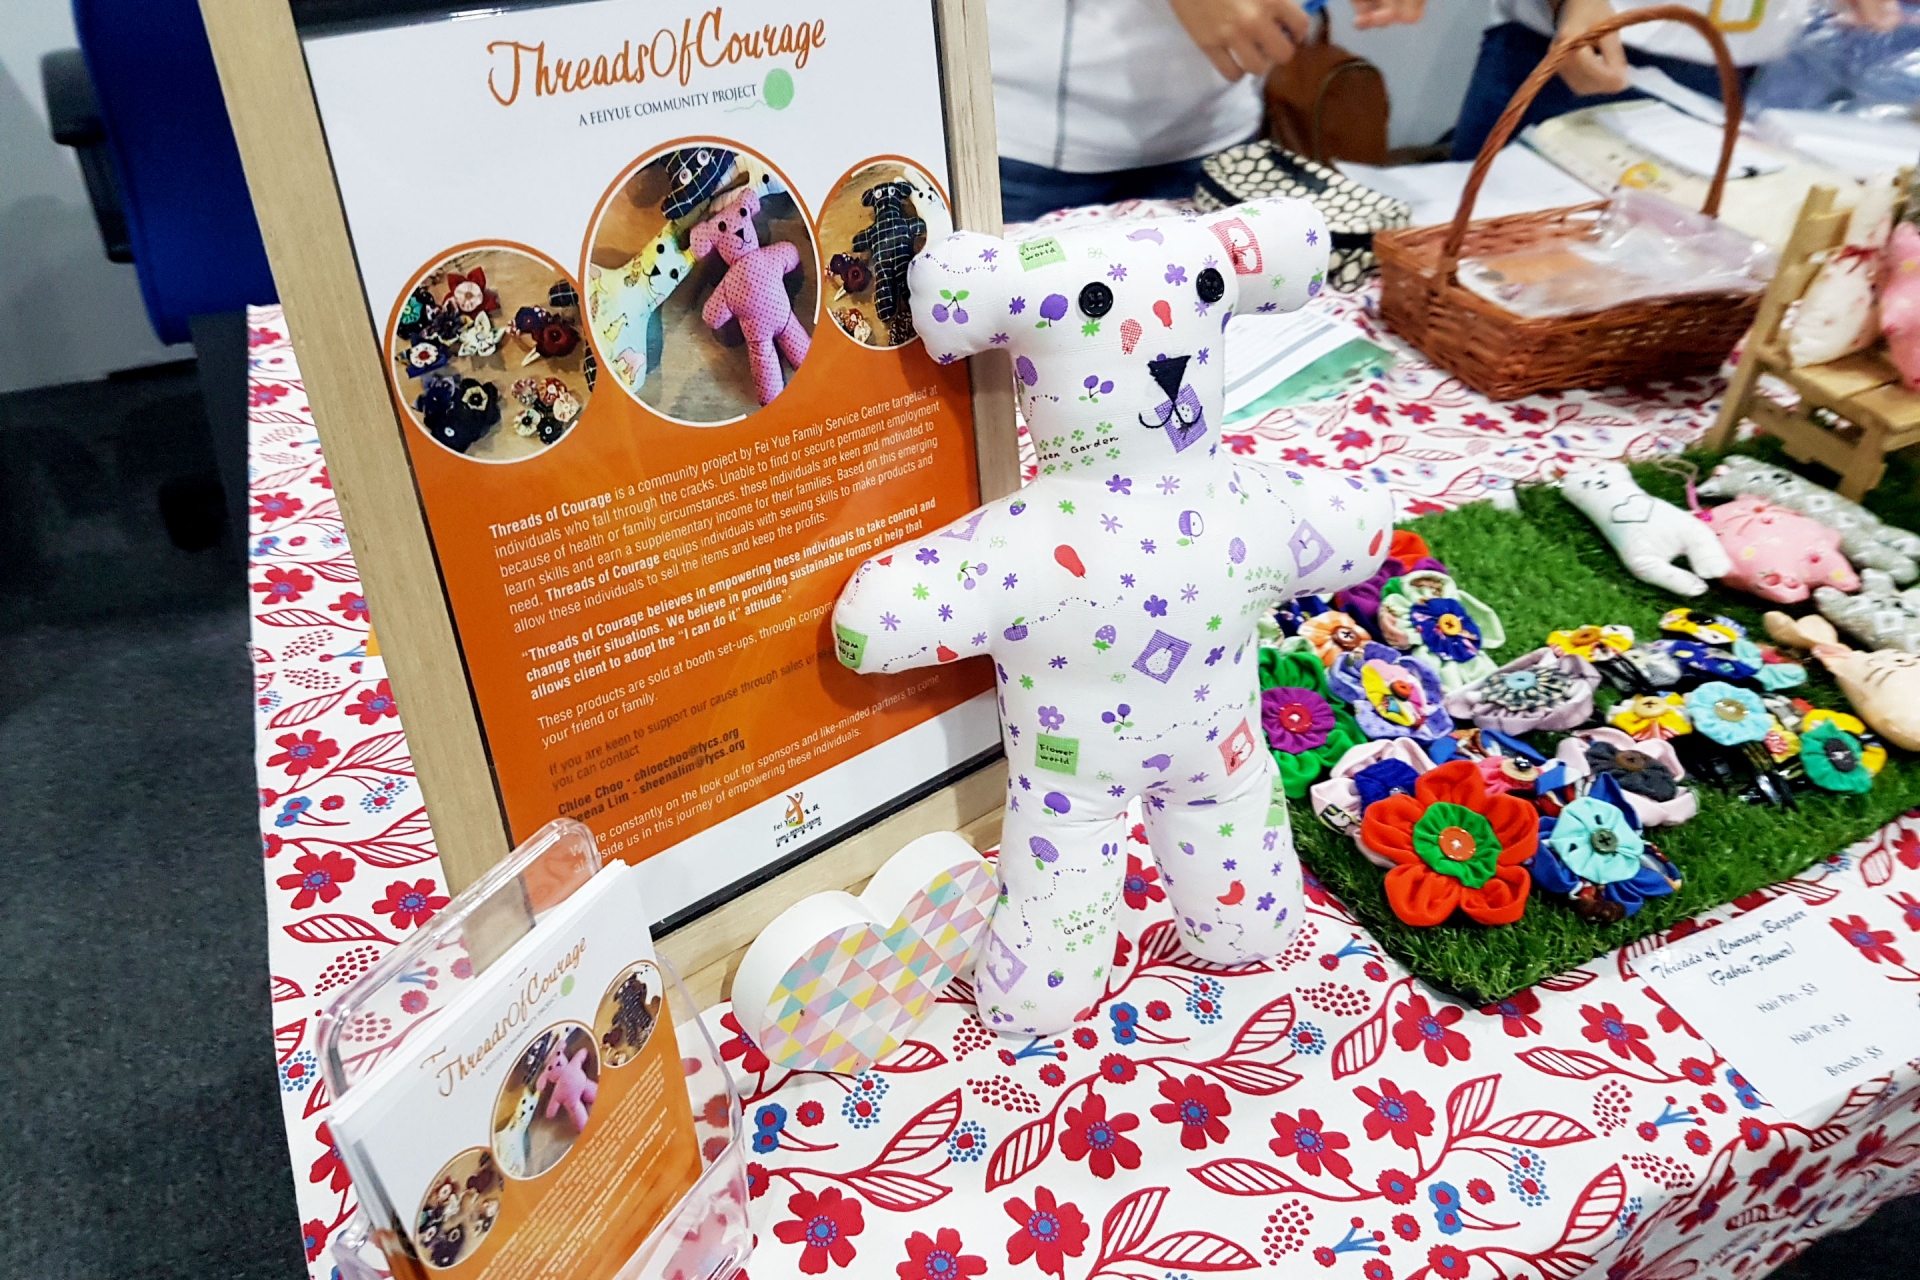 Image showing handmade items and flyers from the Threads of Courage (ToC) project.